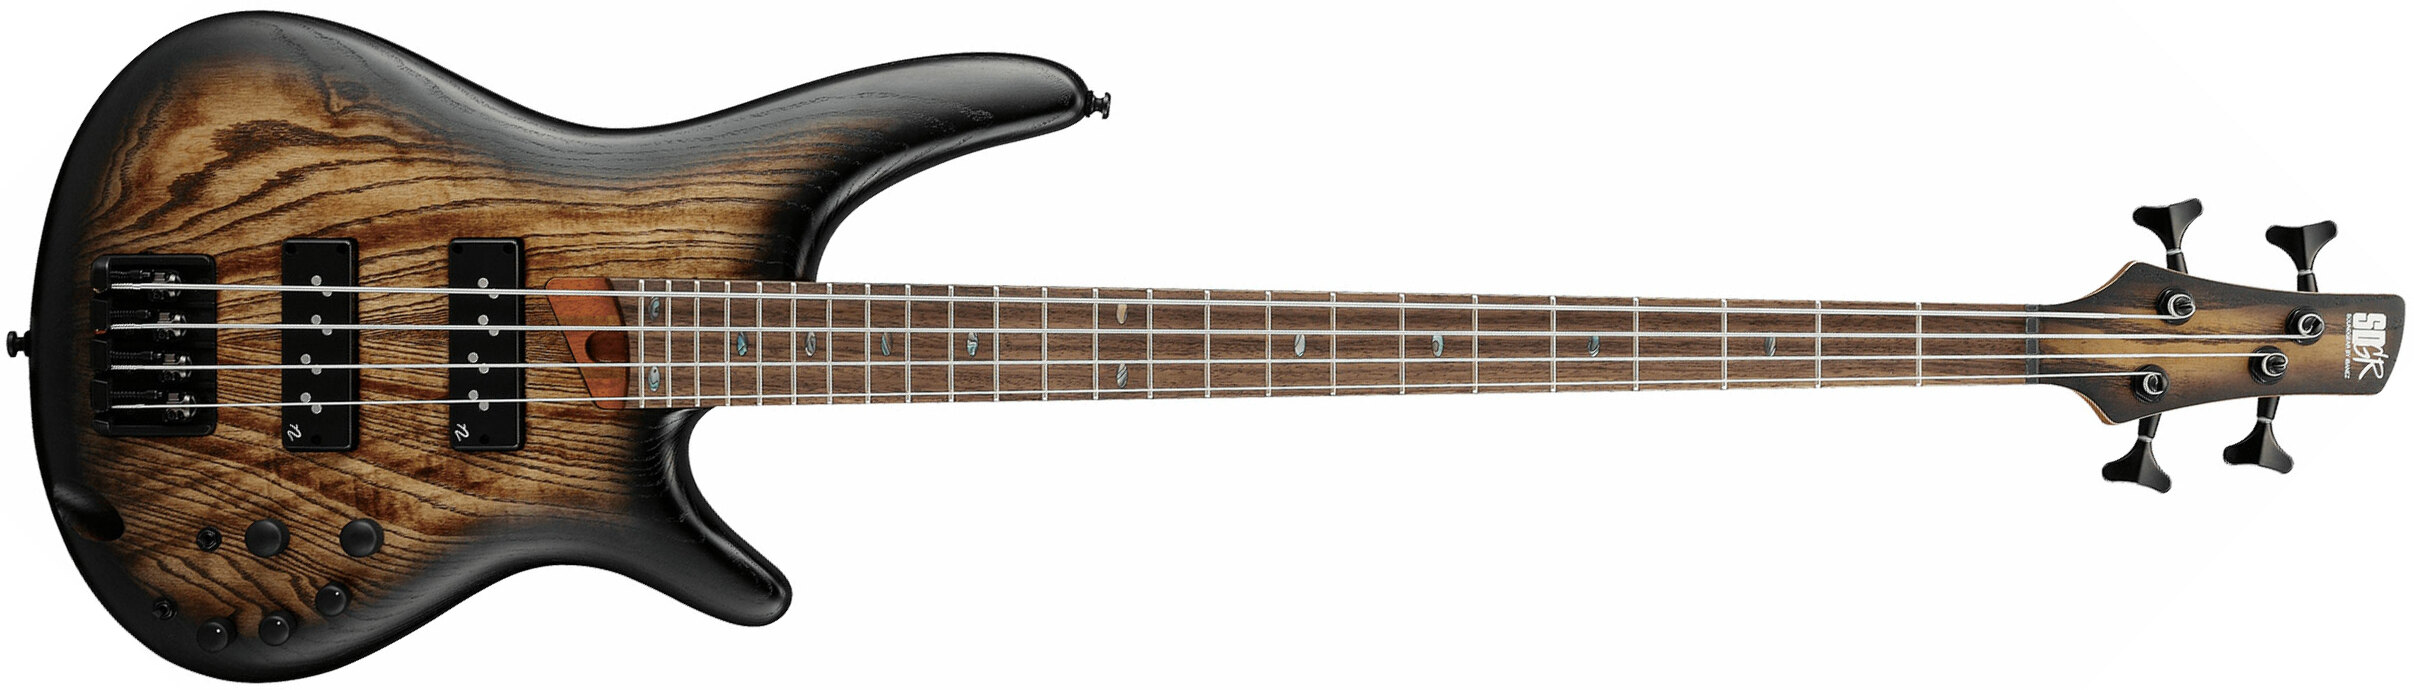 Ibanez Sr600e Ast Standard Active Rw - Antique Brown Stained Burst - Solidbody E-bass - Main picture